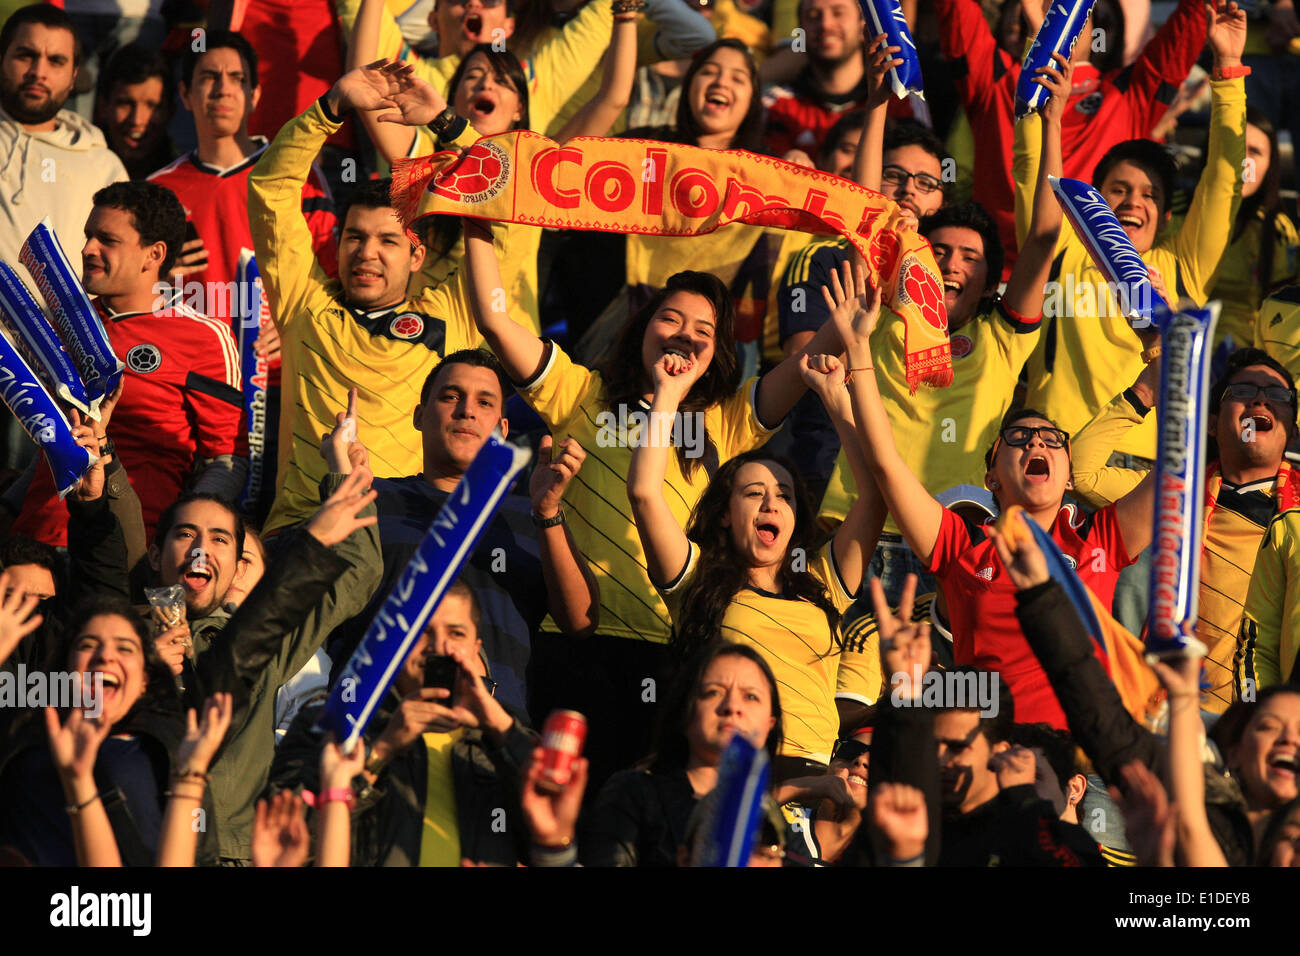 Buenos Aires, Argentina. 31st May, 2014. Fans of Colombia's national soccer team cheer during a friendly soccer match against Senegal in Buenos Aires, capital of Argentina, on May 31, 2014. © Martin Zabala/Xinhua/Alamy Live News Stock Photo